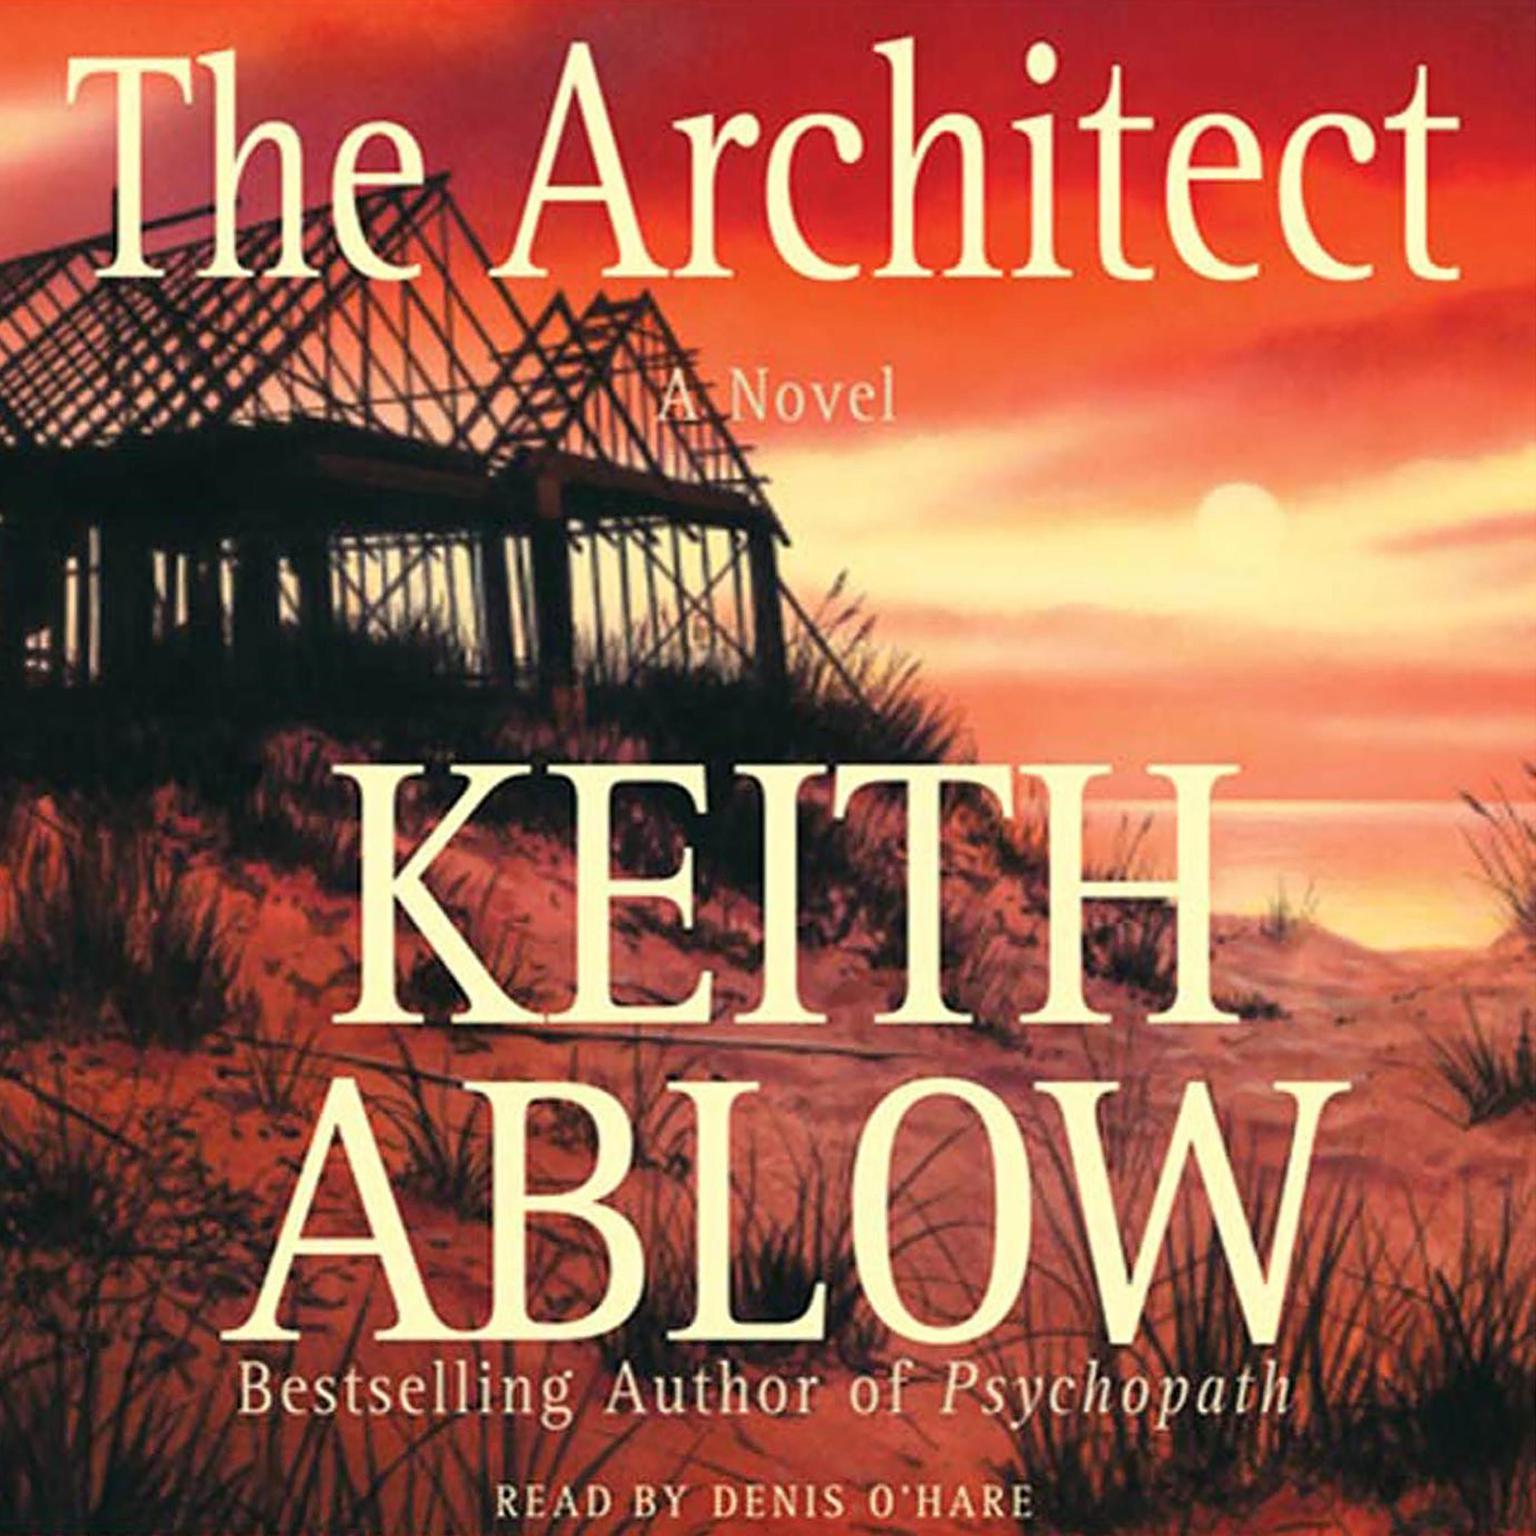 The Architect (Abridged): A Novel Audiobook, by Keith Ablow